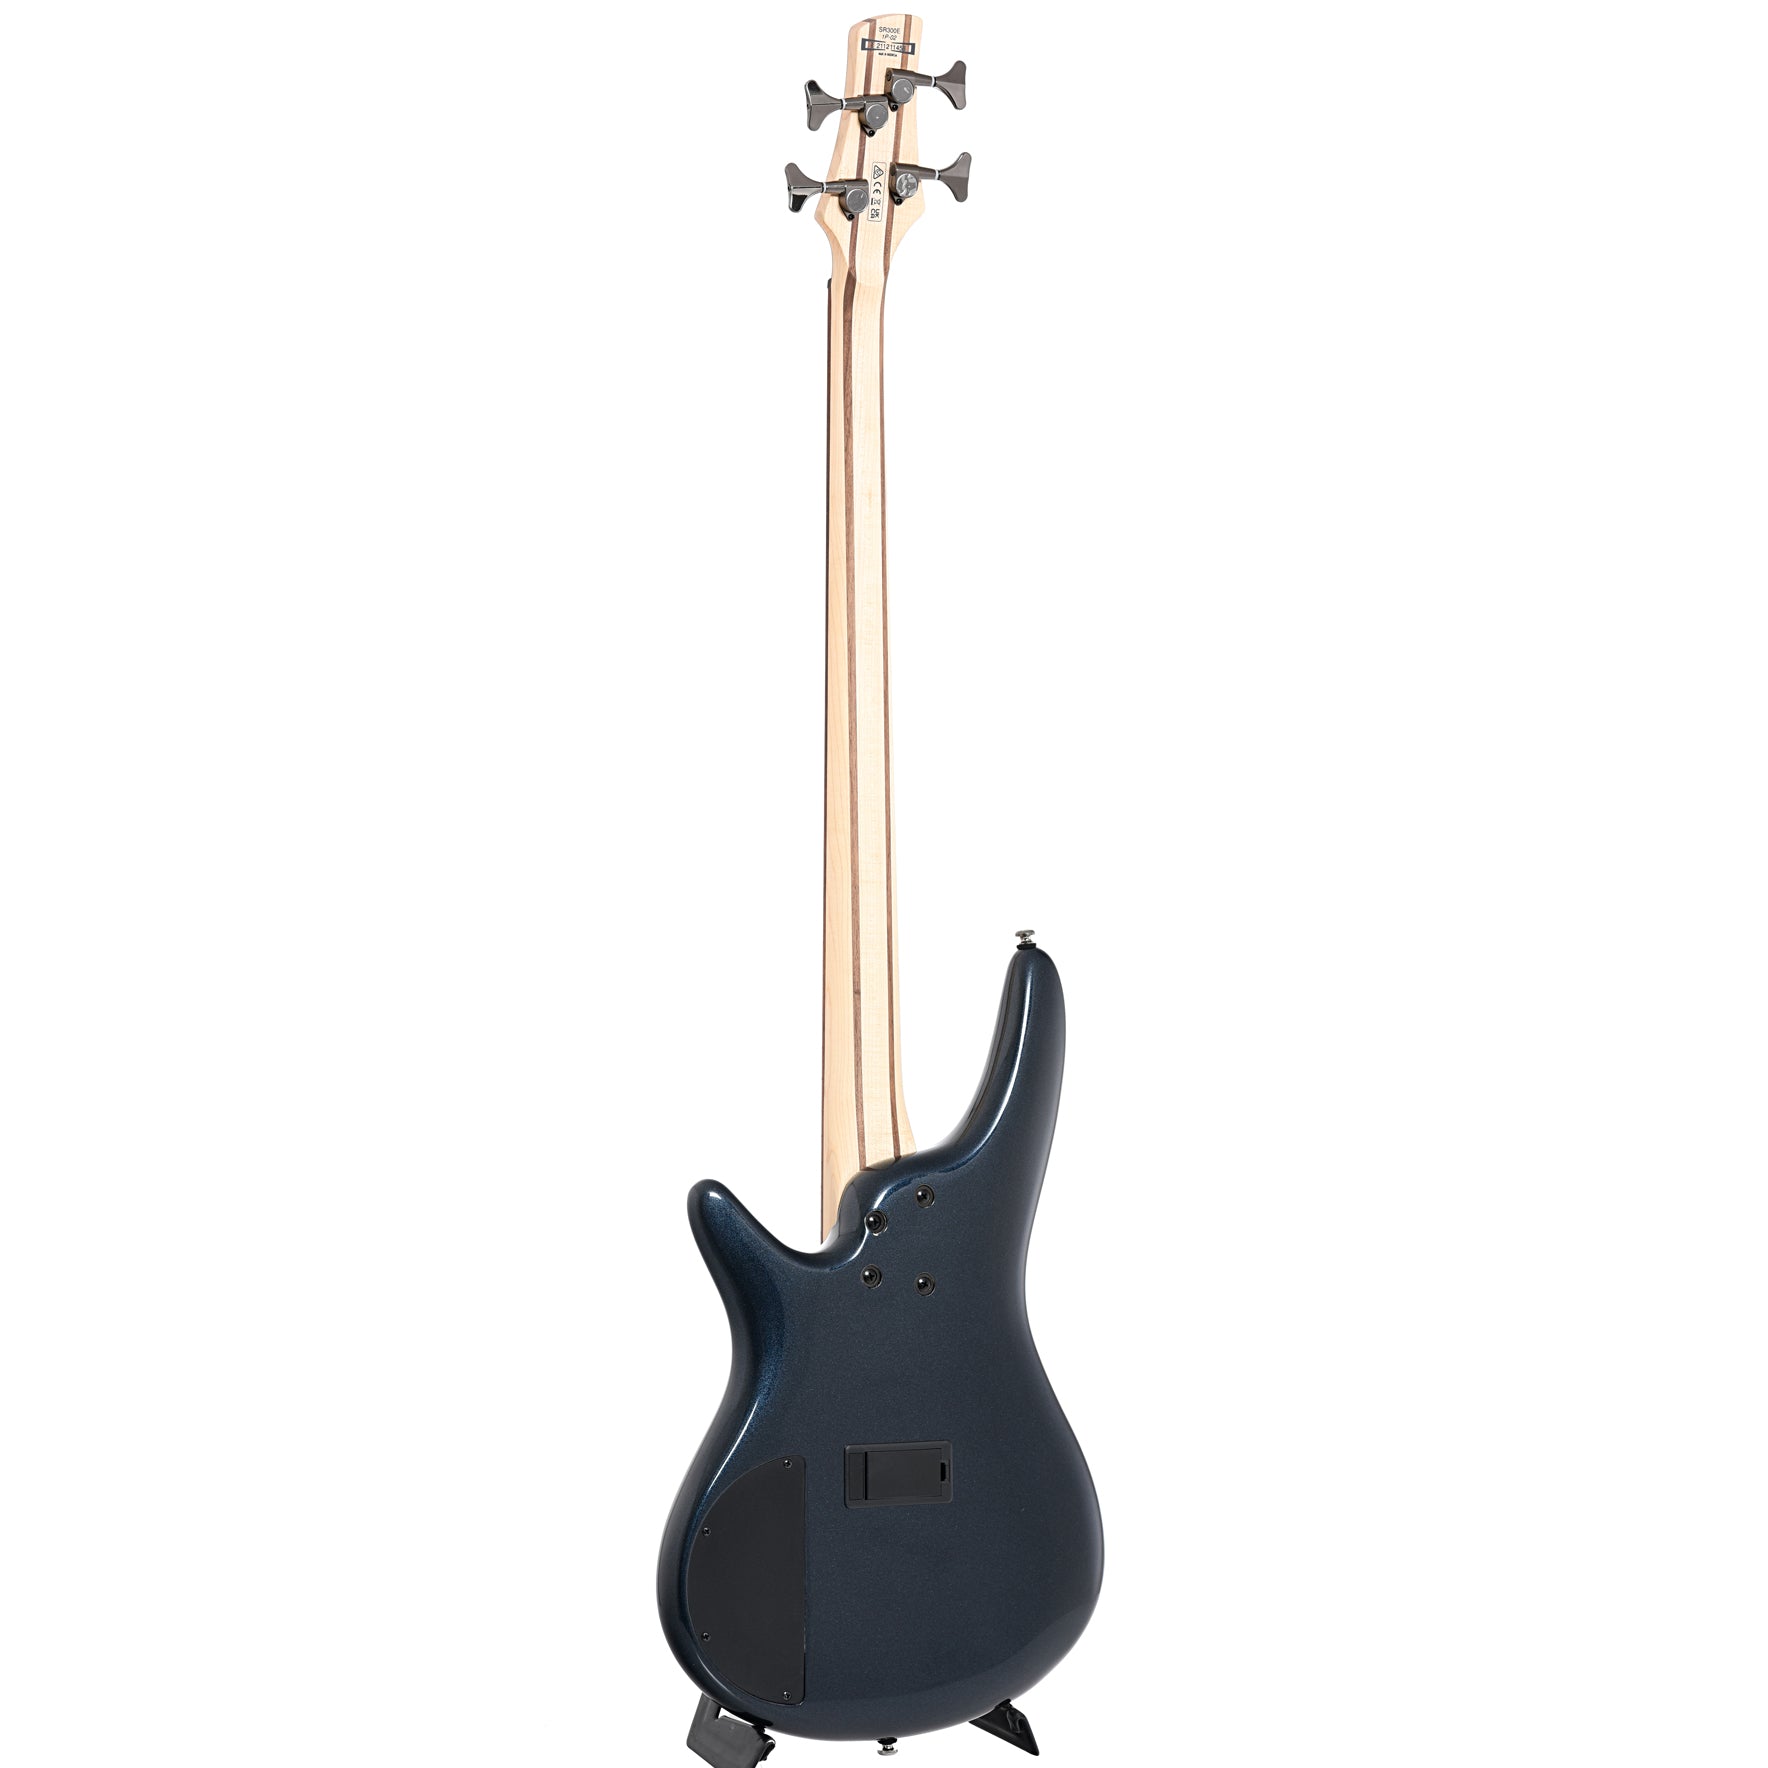 Image 12 of Ibanez SR300E 4-String Bass, Iron Pewter- SKU# SR300E-IPT : Product Type Solid Body Bass Guitars : Elderly Instruments